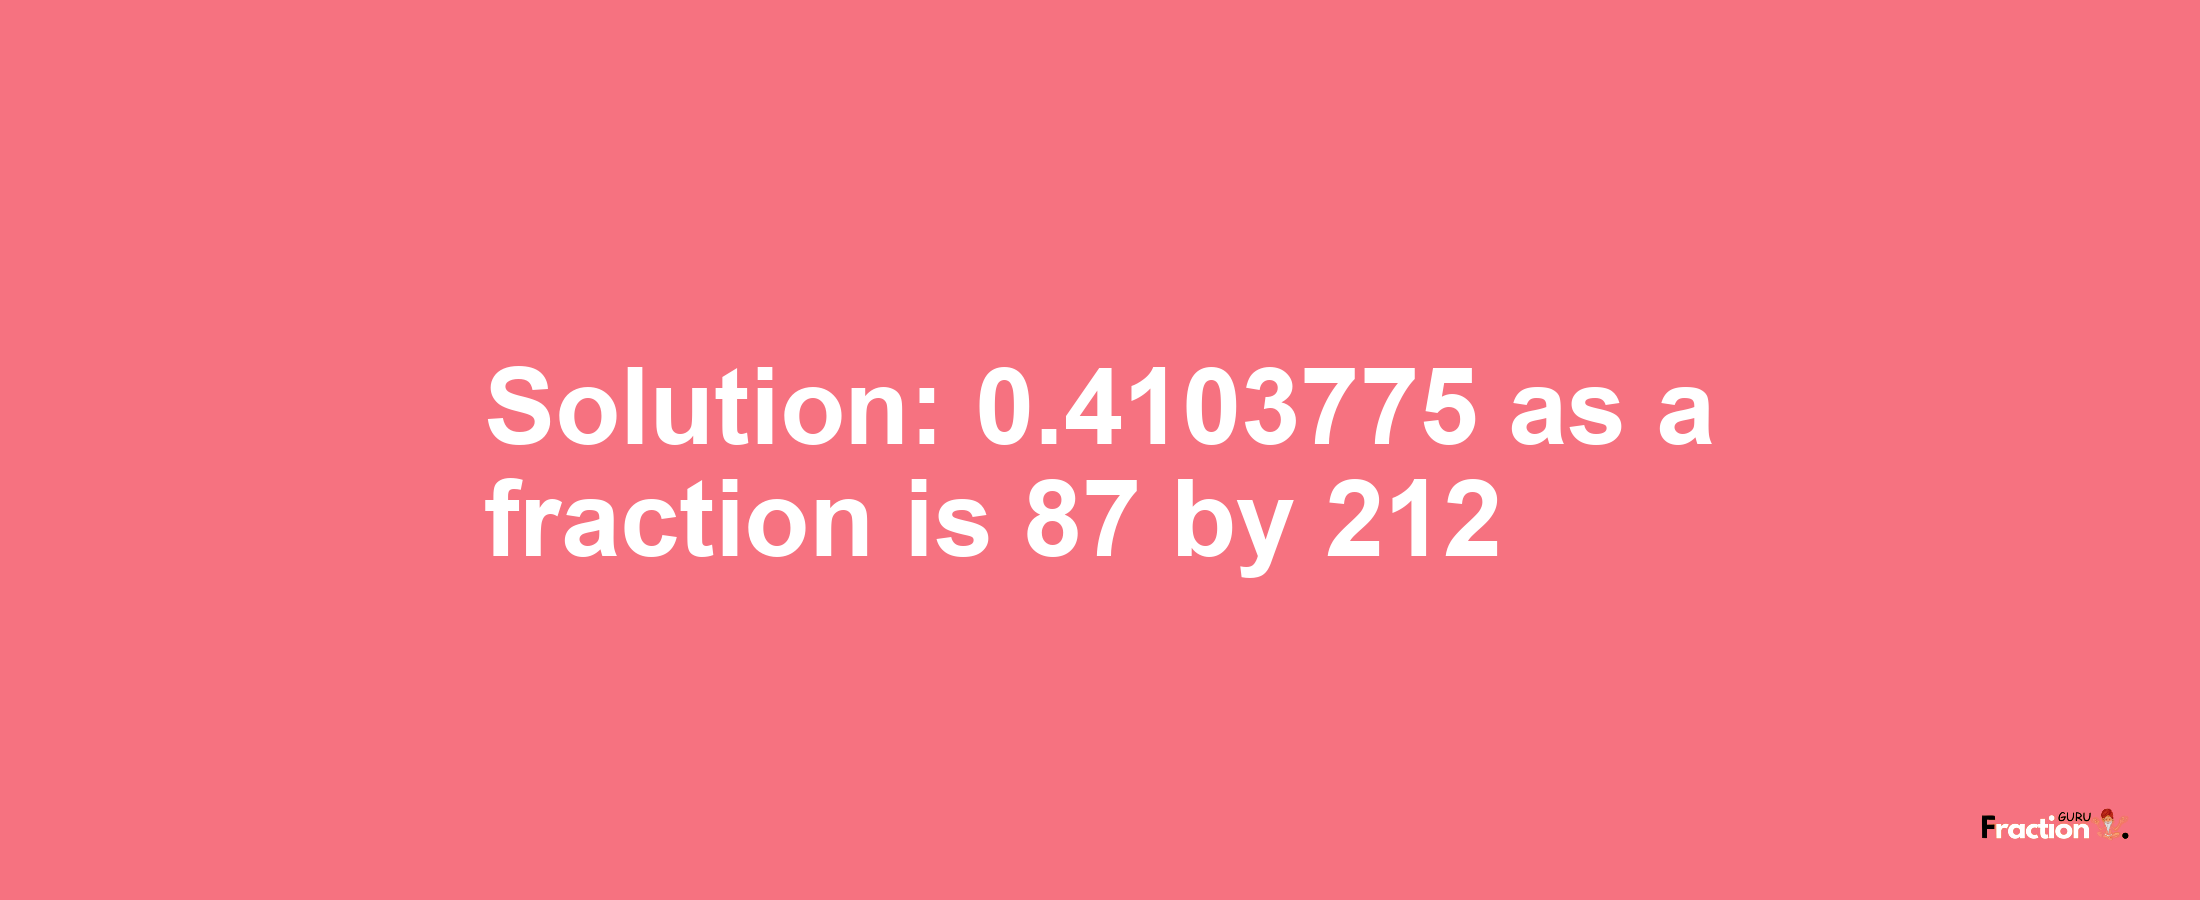 Solution:0.4103775 as a fraction is 87/212